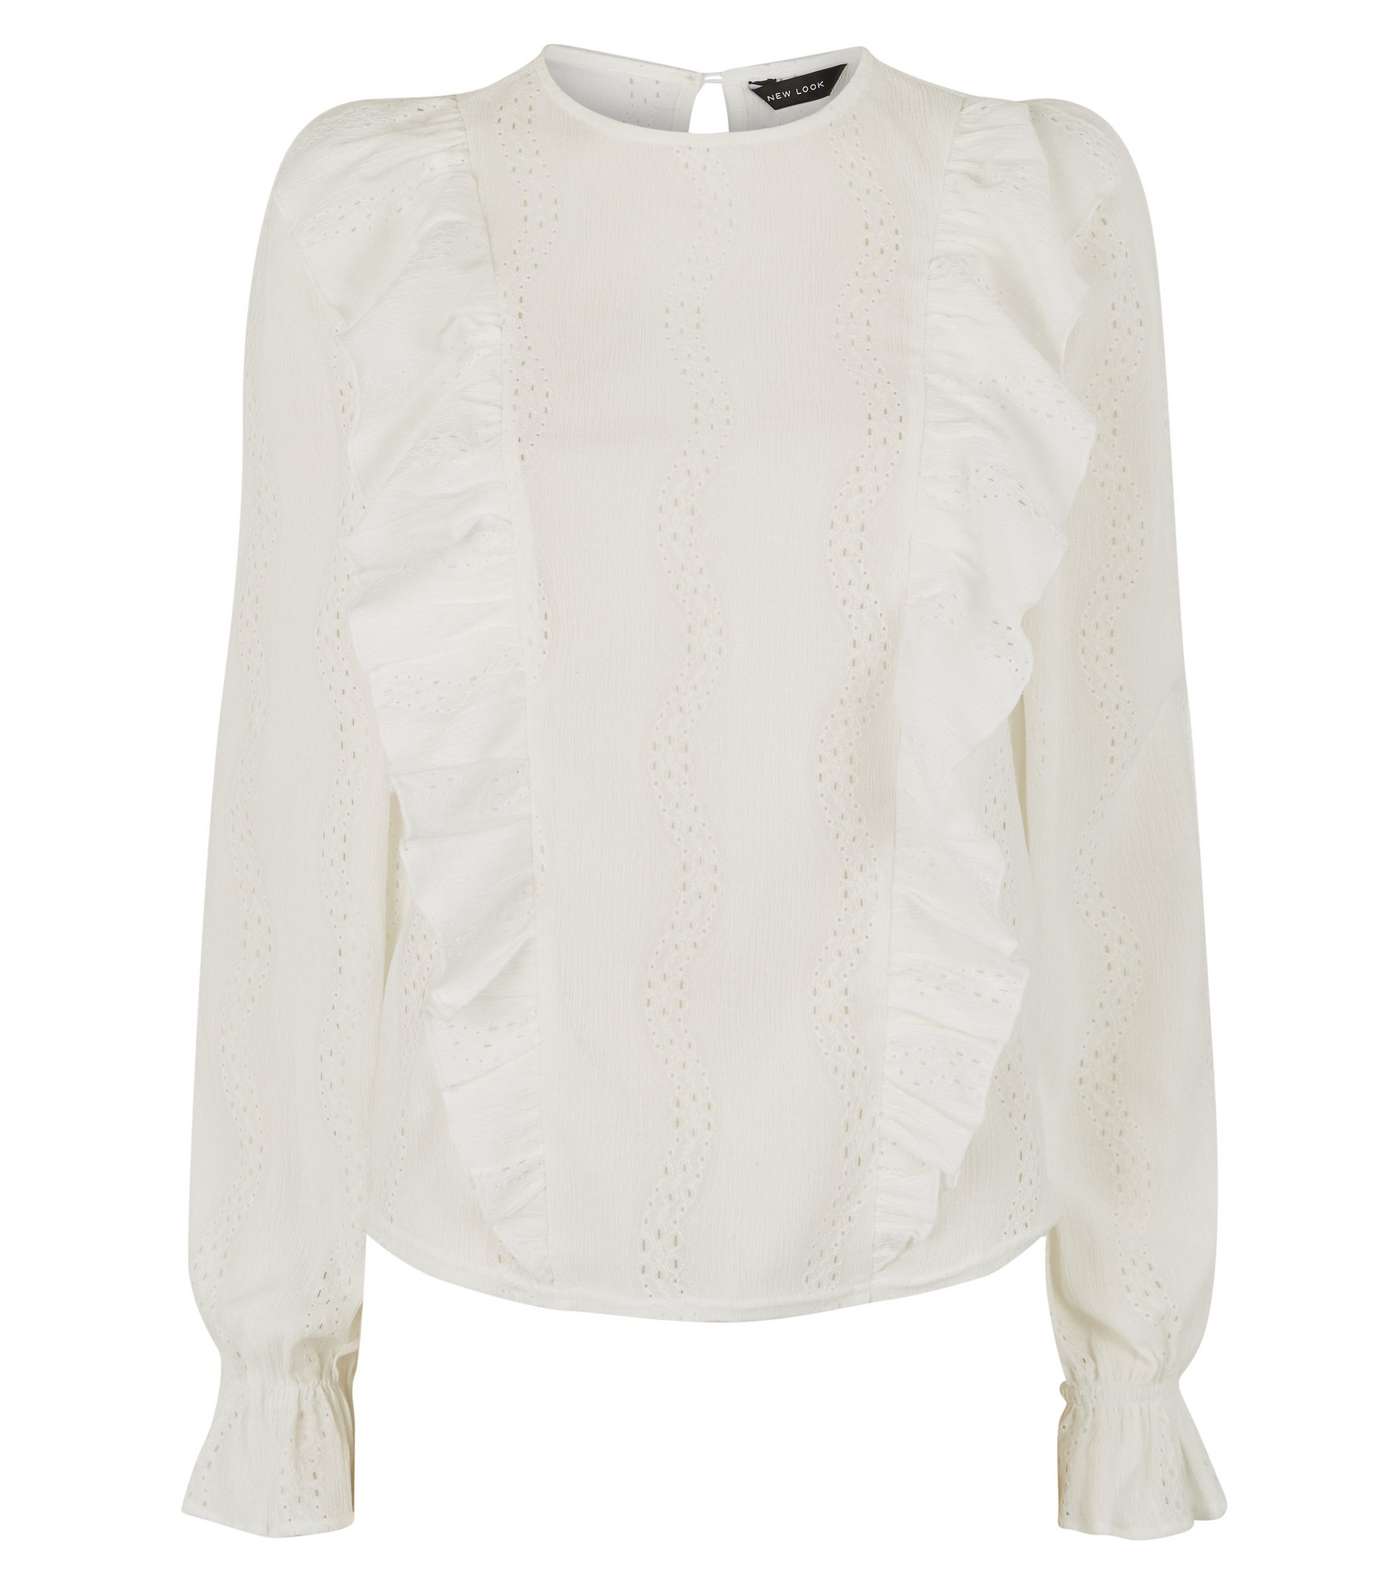 Off White Frill Laser Cut Textured Top  Image 4